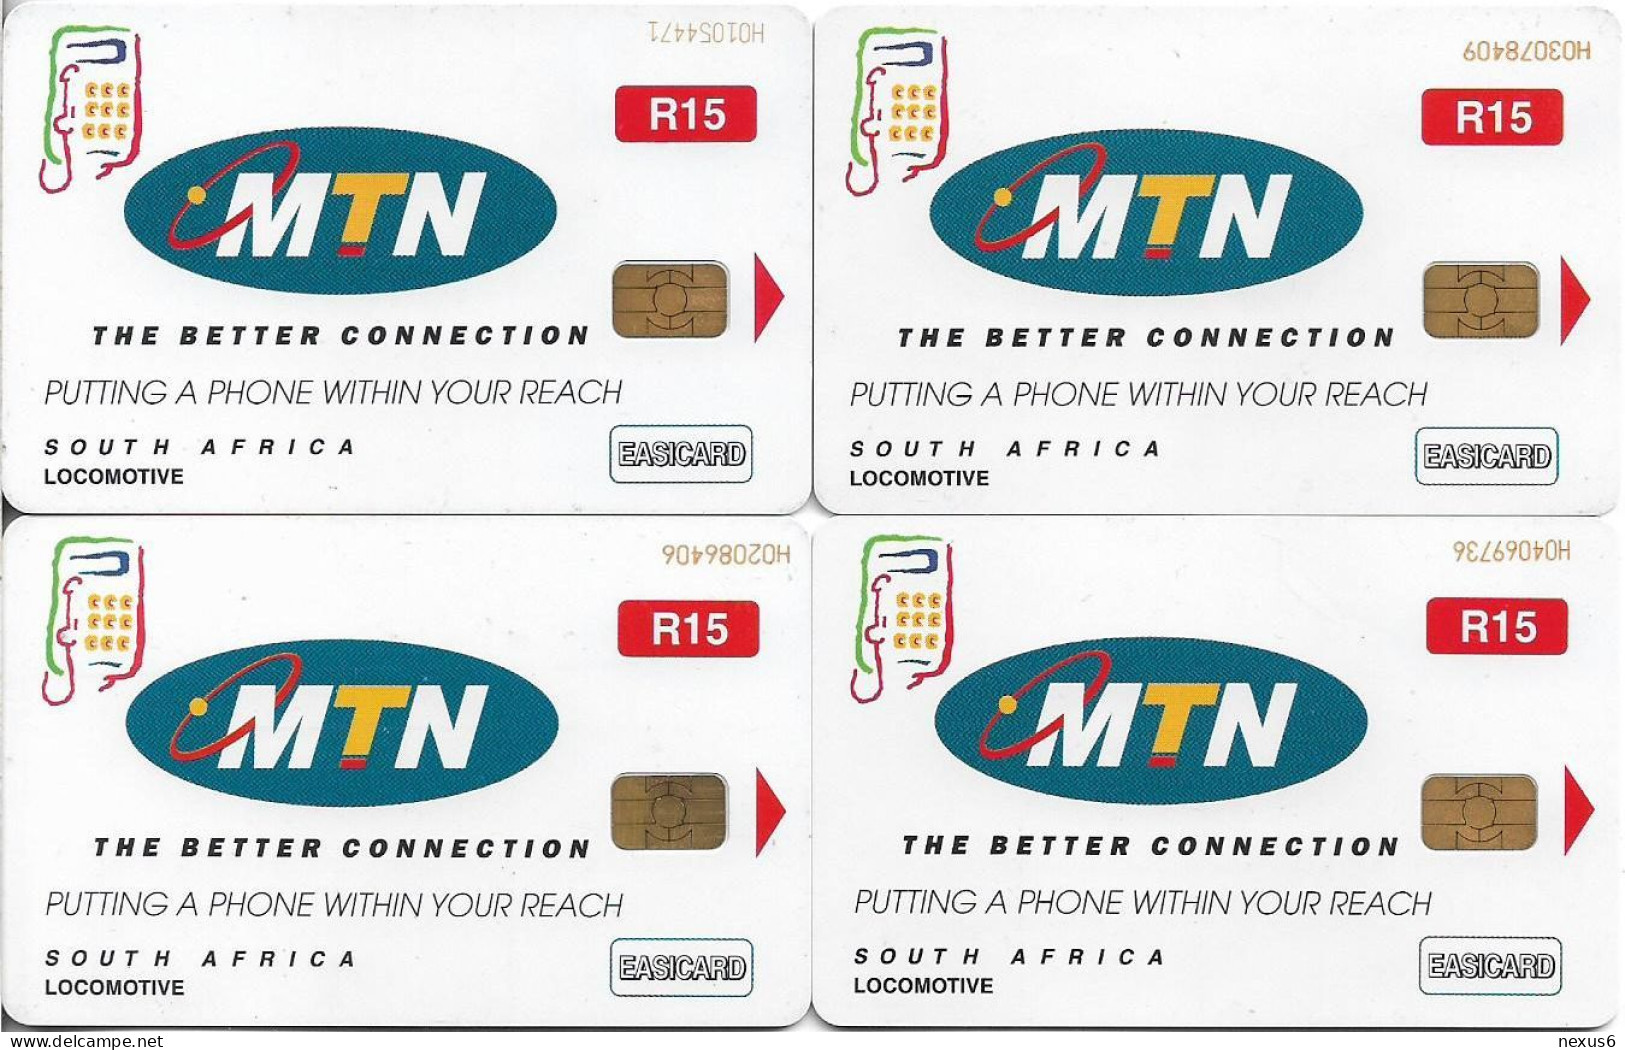 S. Africa - MTN - Classic Locomotives Complete Set Of 4 Cards, Chip SC8, 10.2002, 15R, Used - South Africa